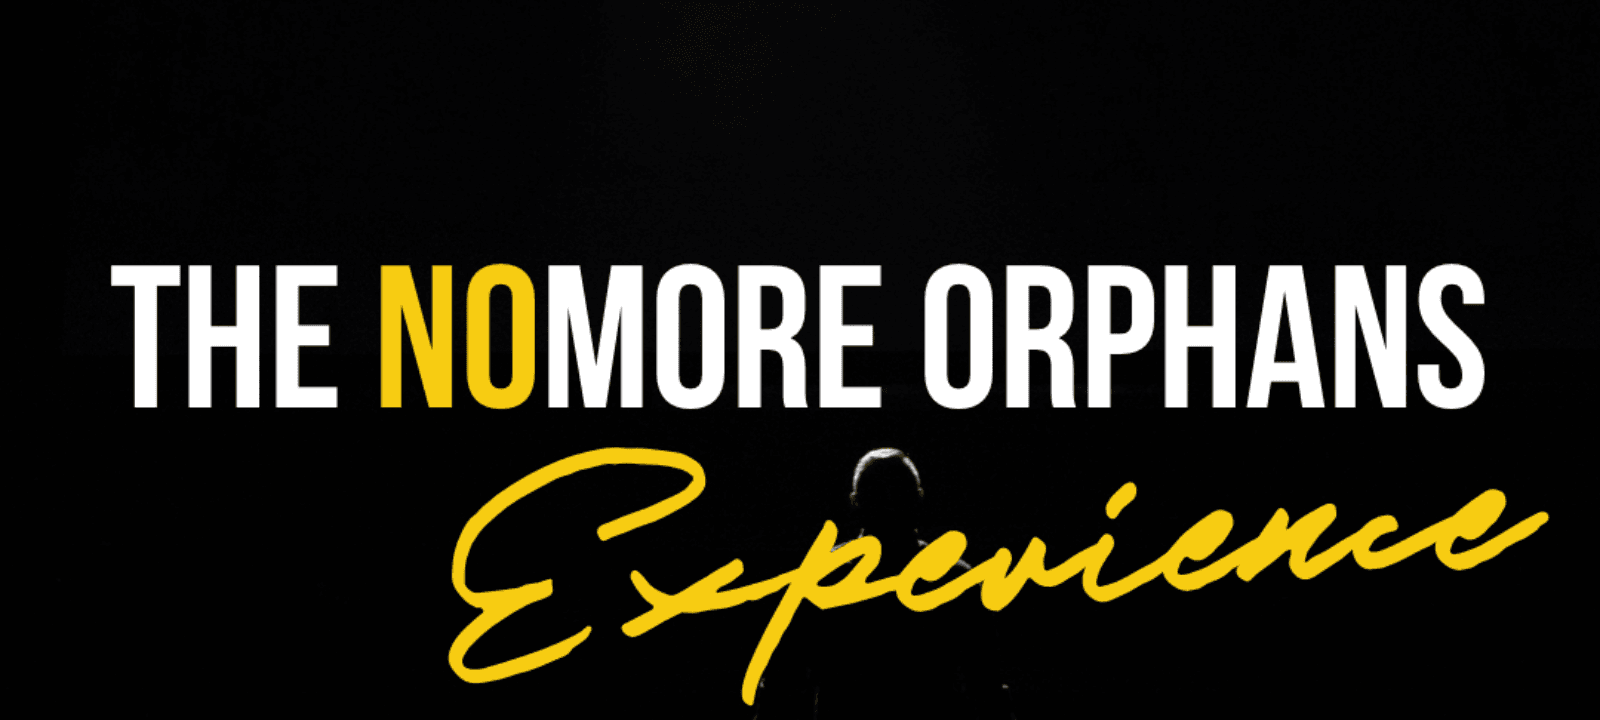 The NOMore Orphans Experience